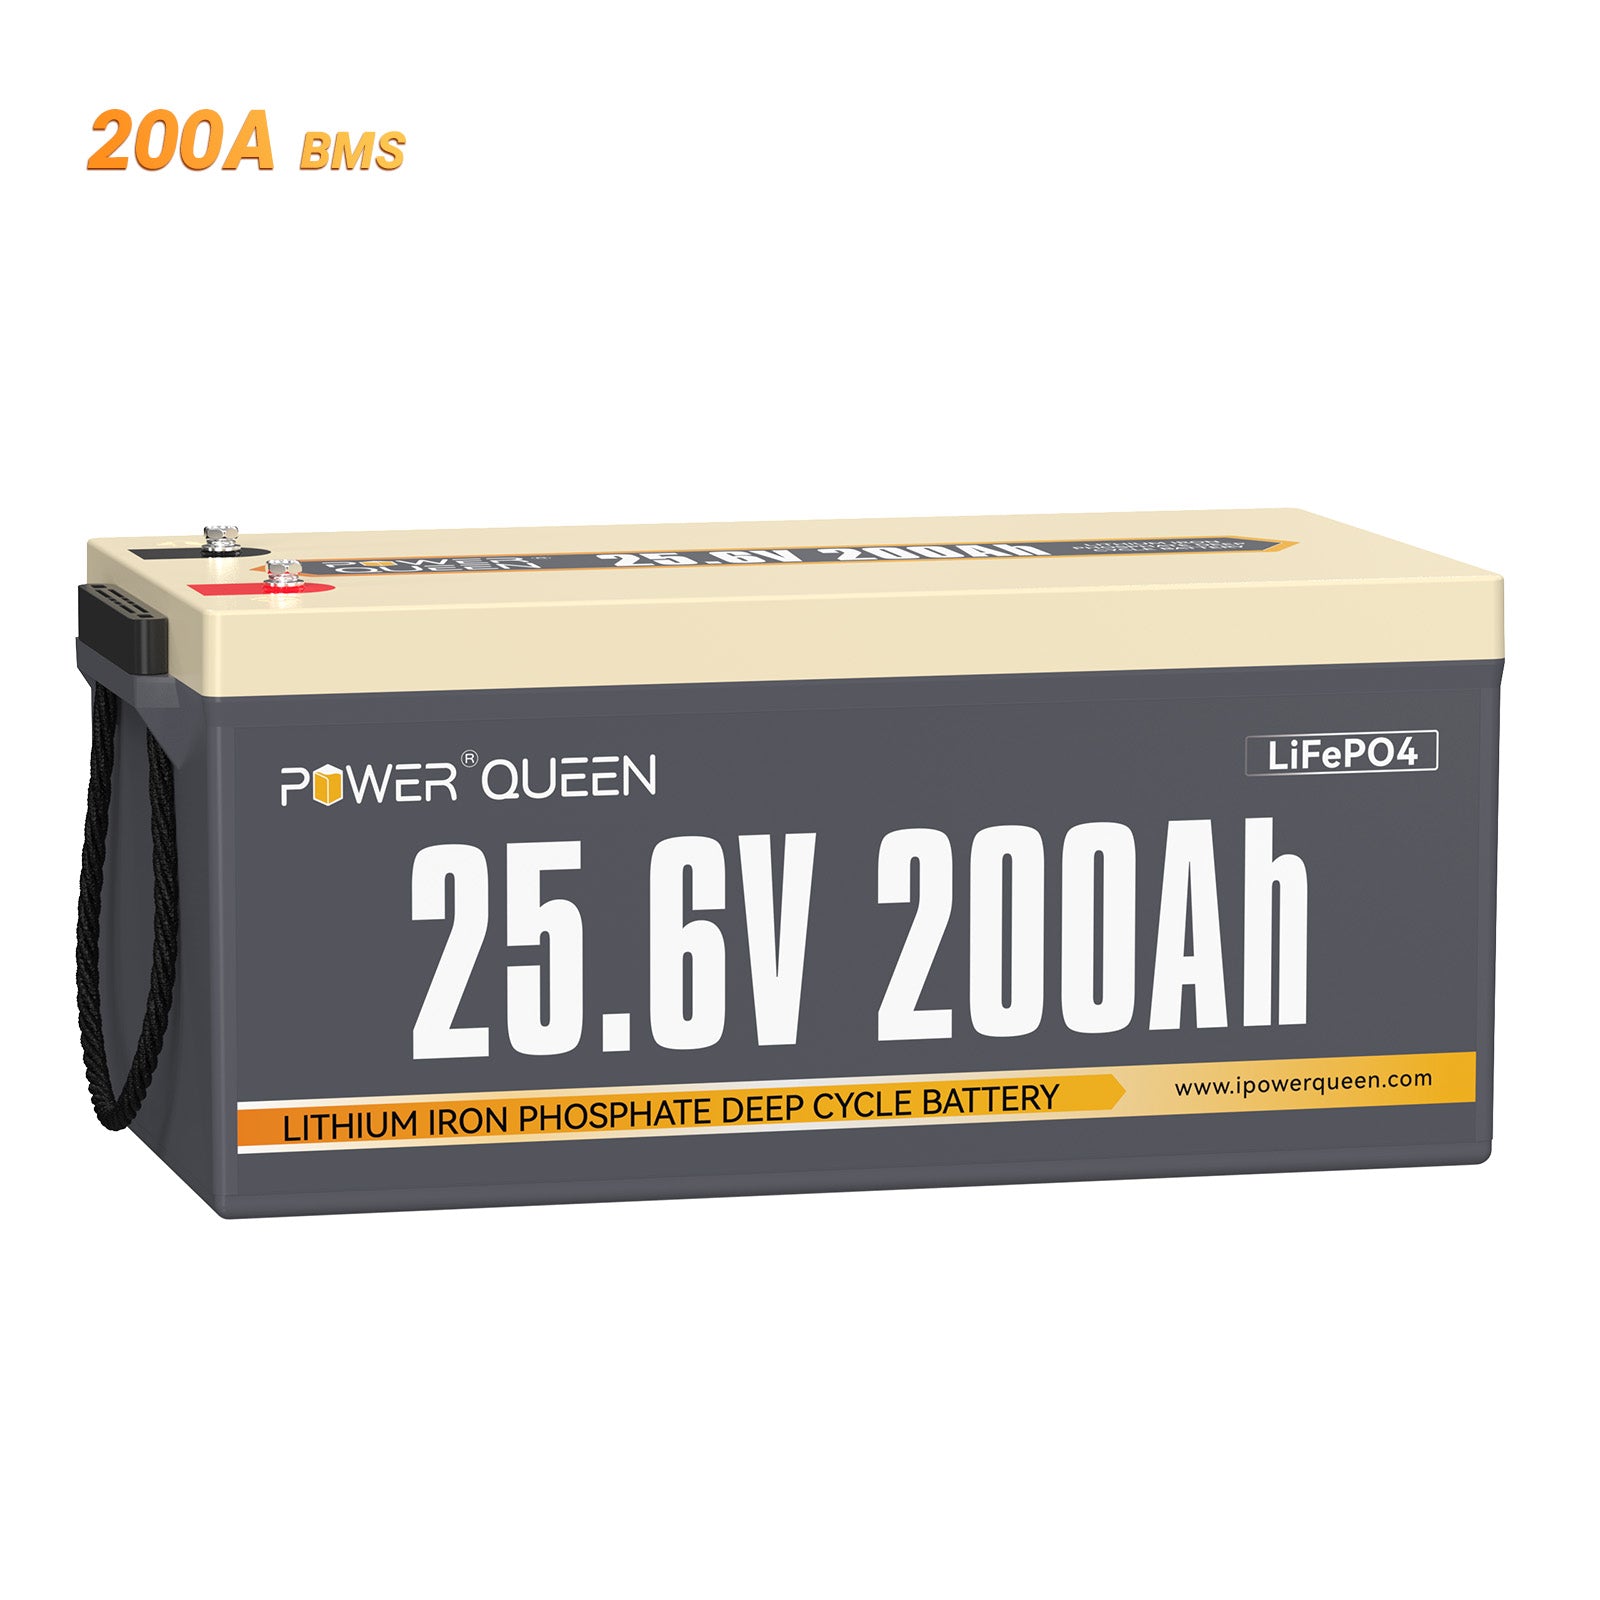 Power Queen 25.6V 200Ah LiFePO4 battery, built-in 200A BMS